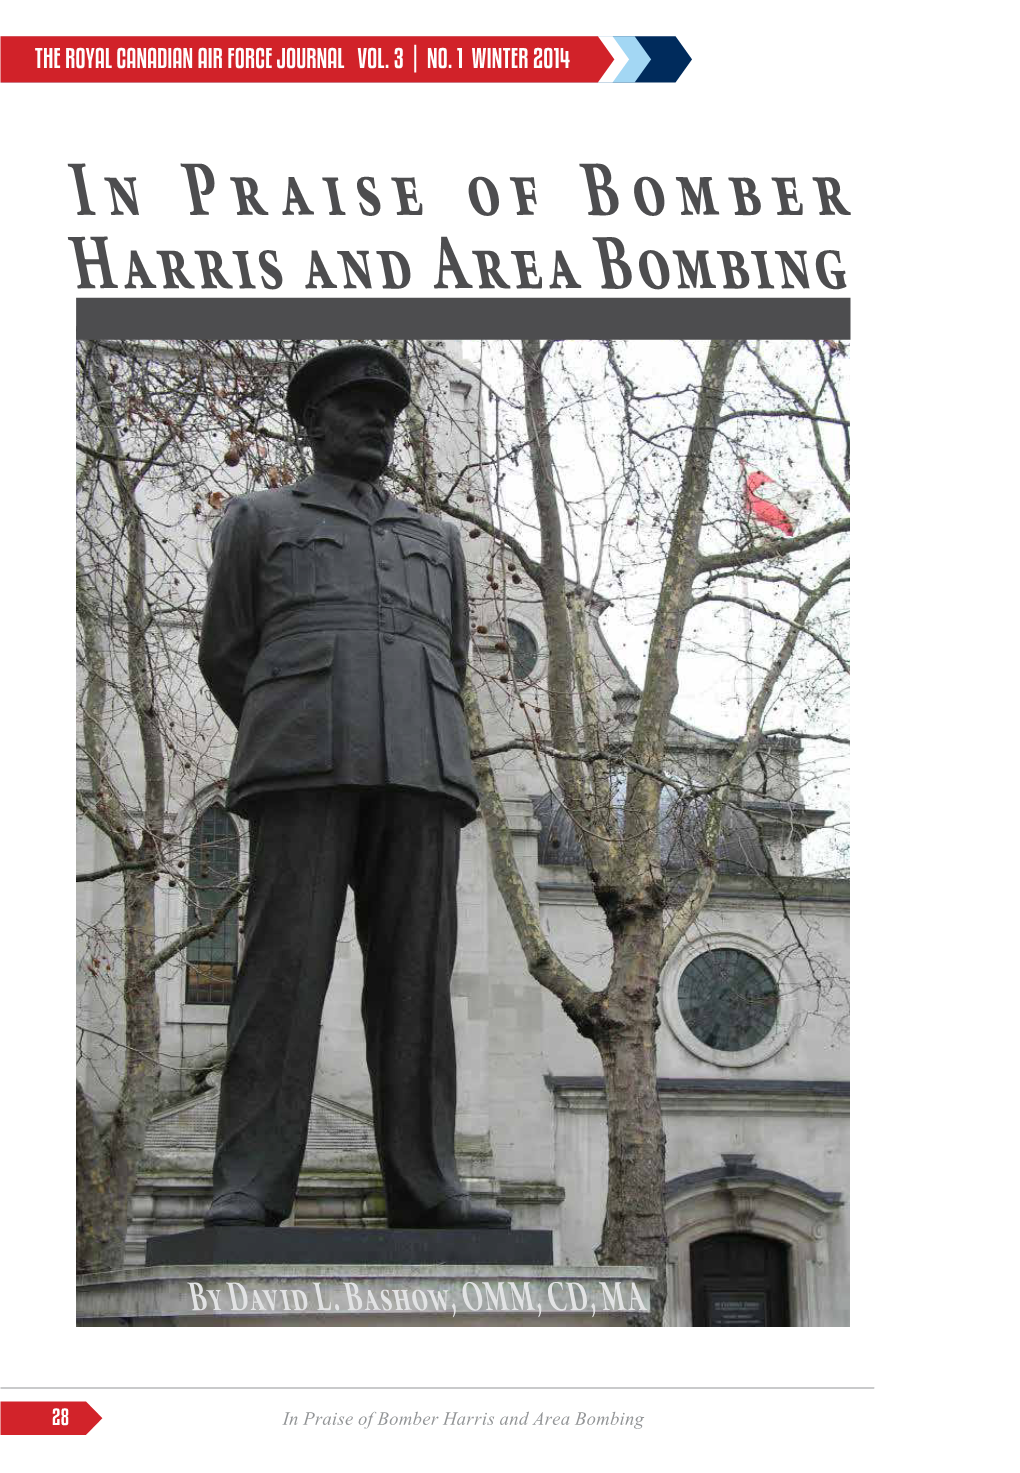 In Praise of Bomber Harris and Area Bombing